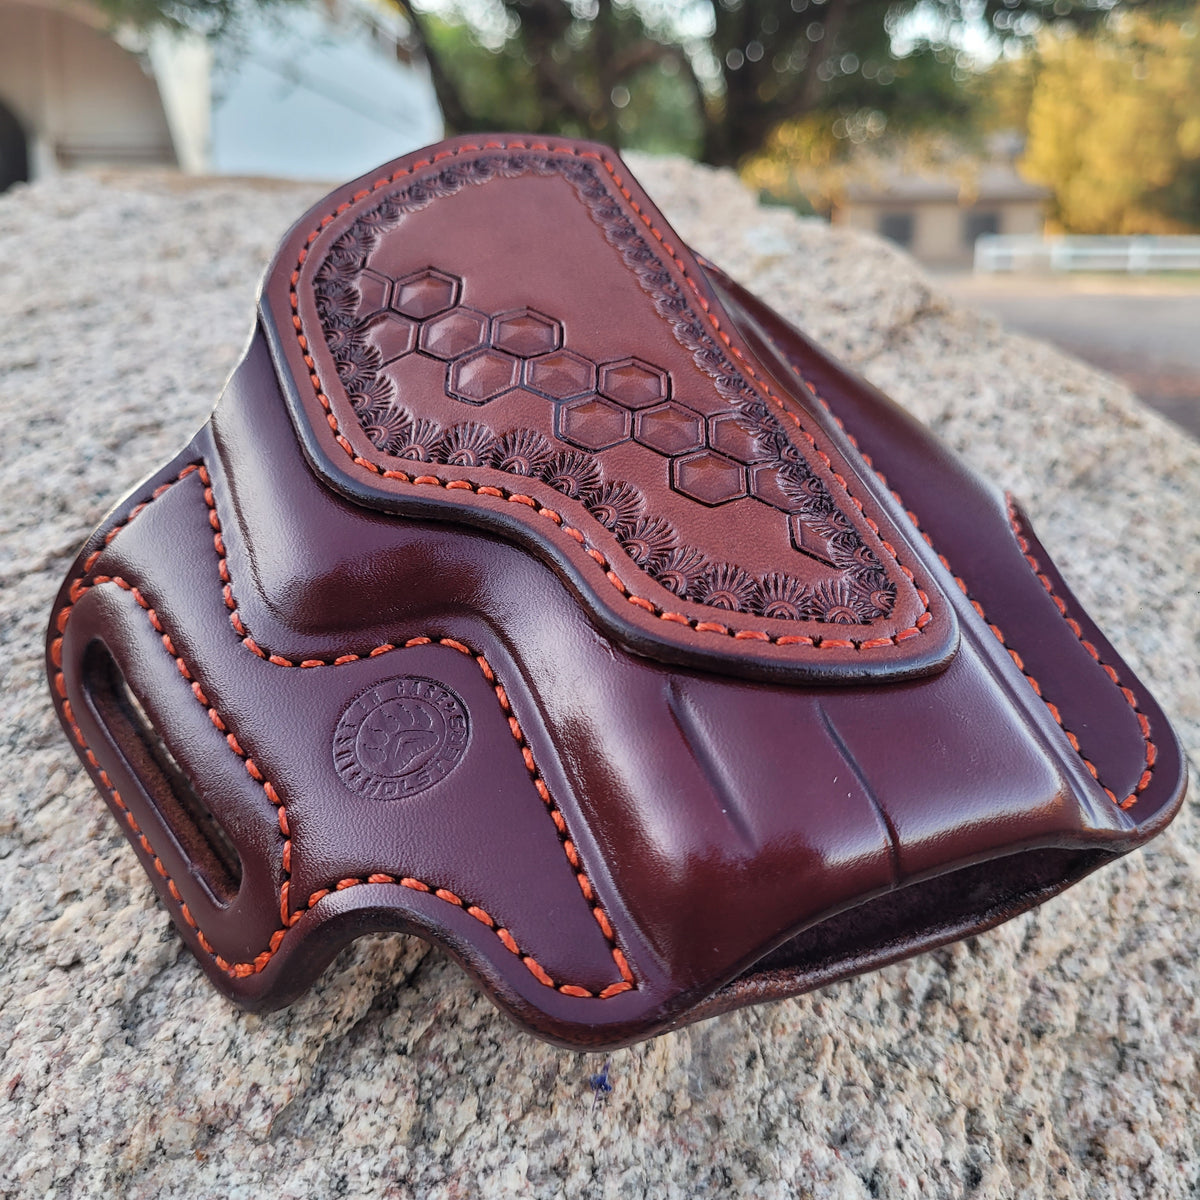 Sig P320 Compact/Carry CLassic Holster Mah/Brn Burnt Orange Stitching Partial Hex stamp